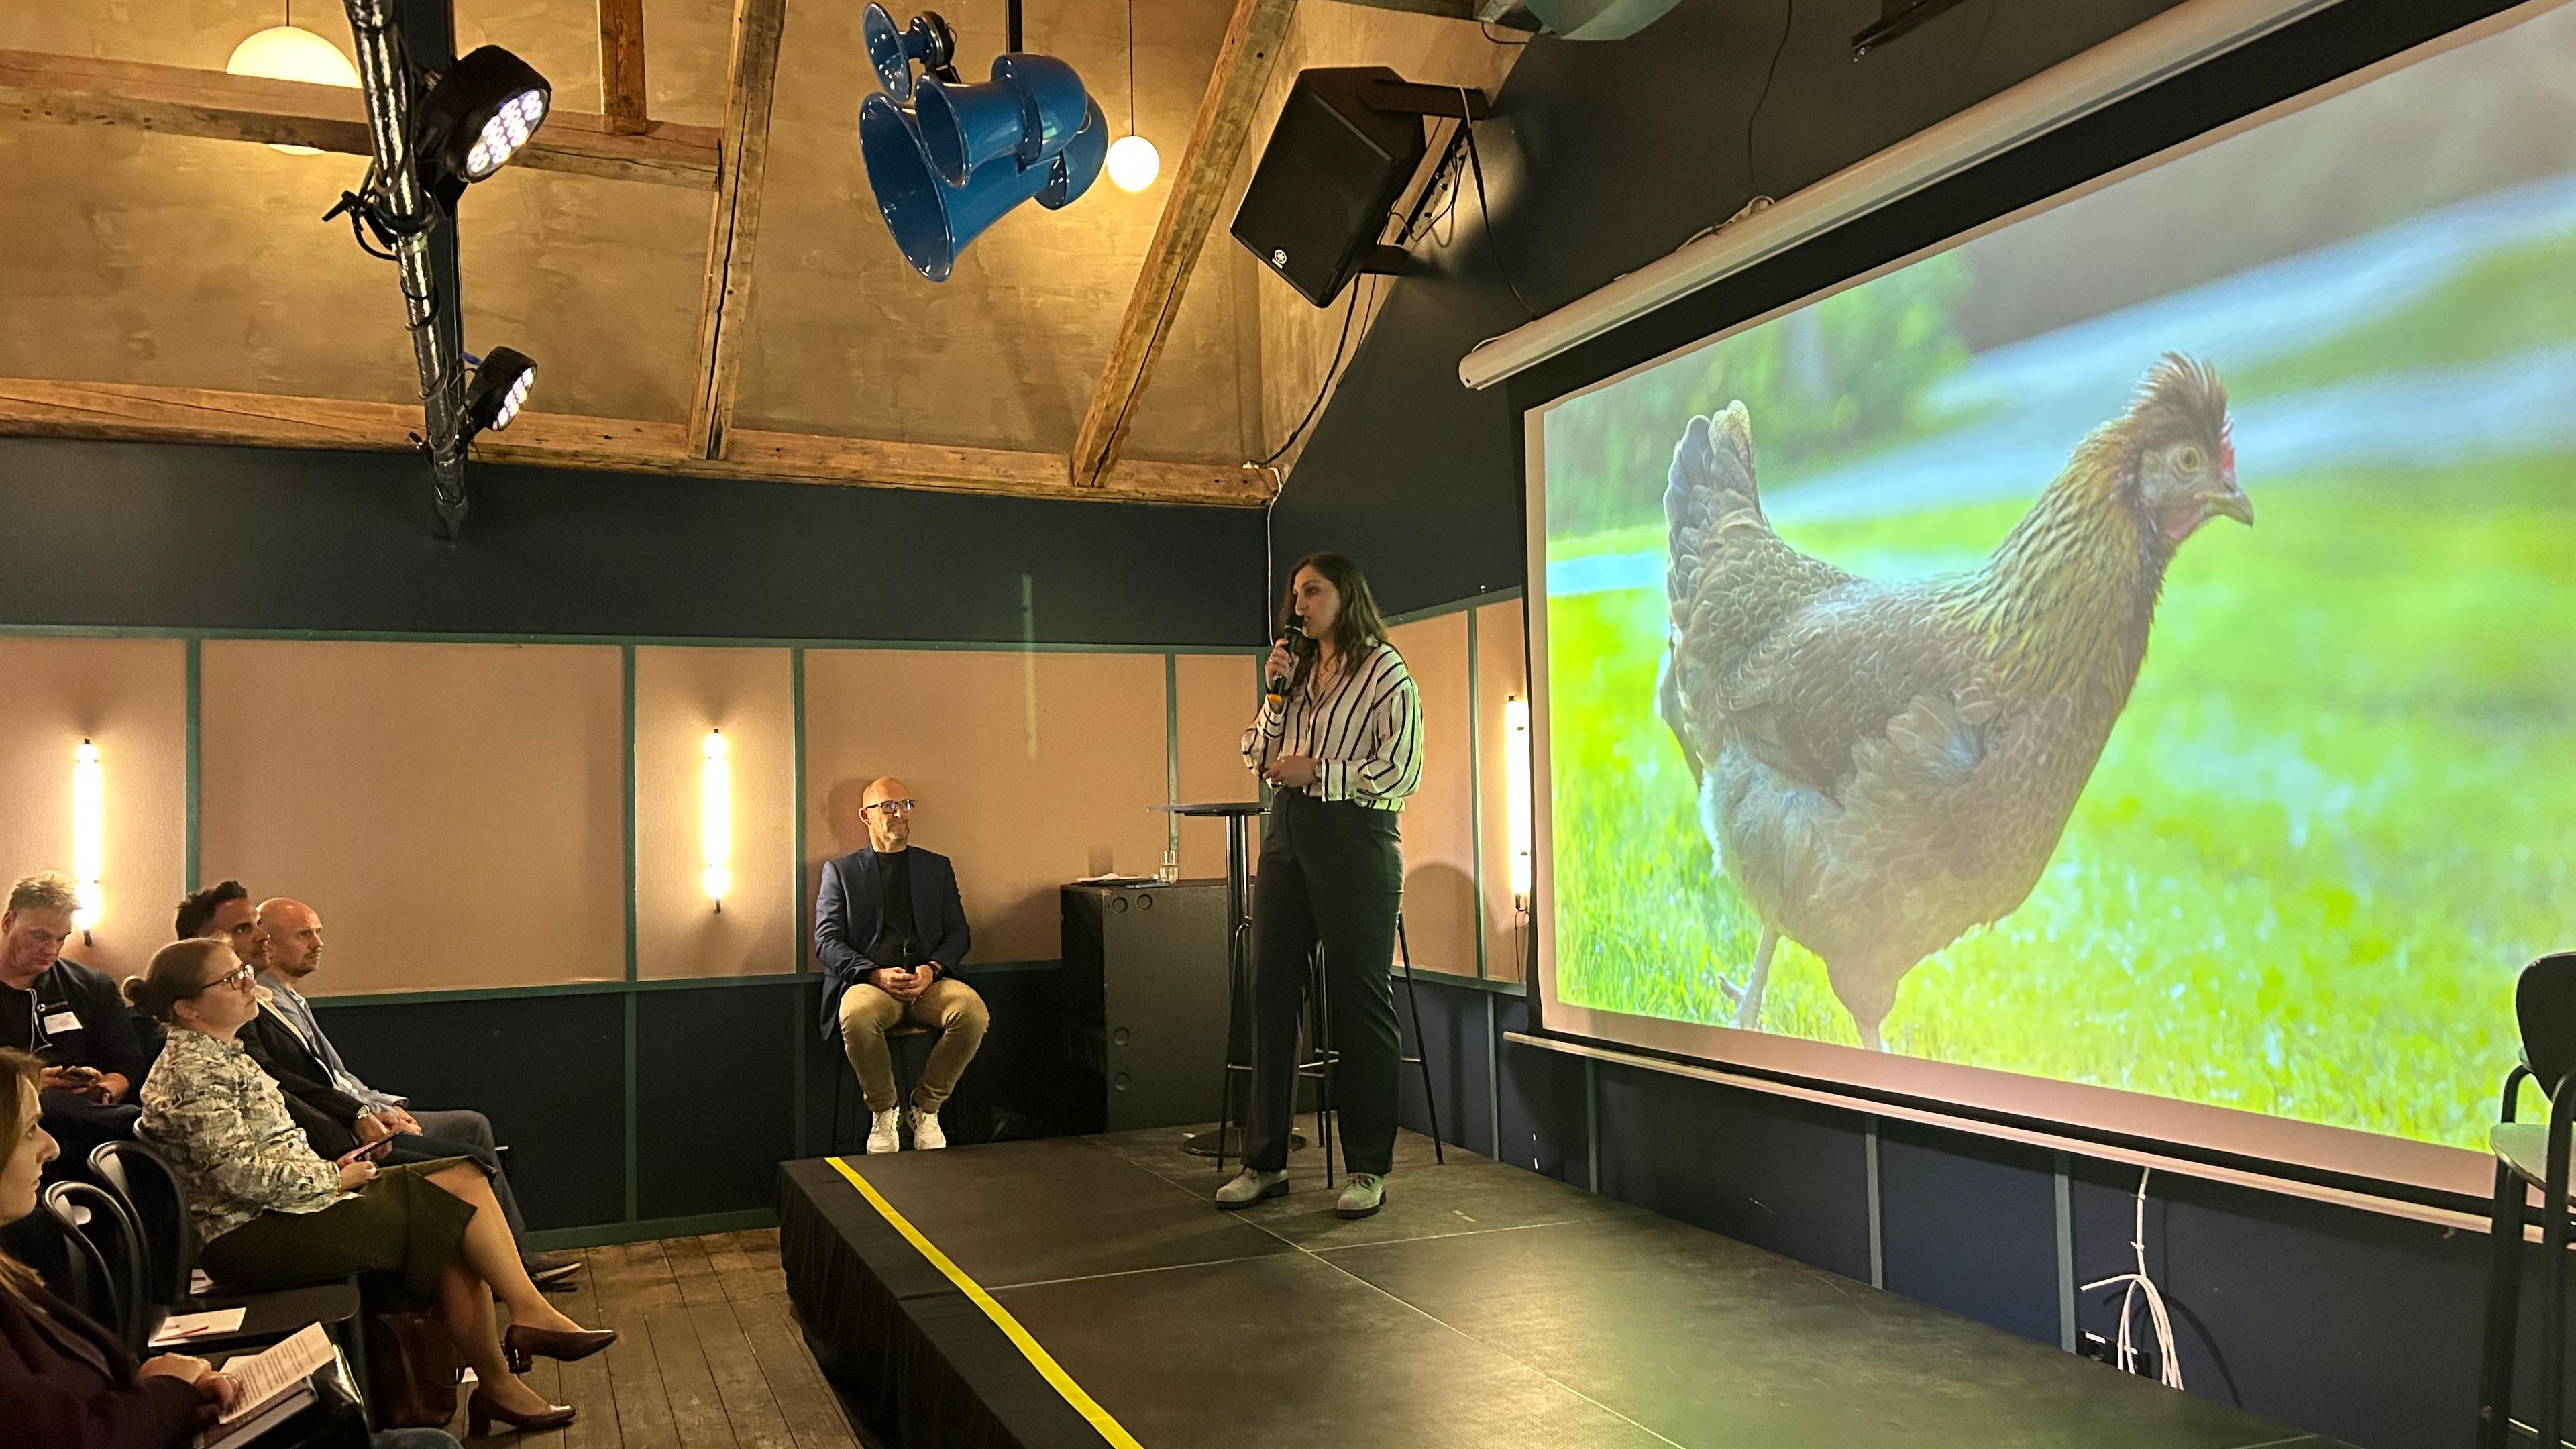 The company FLUFFY pitching at Innovation Norway's Oslo Innovation Week